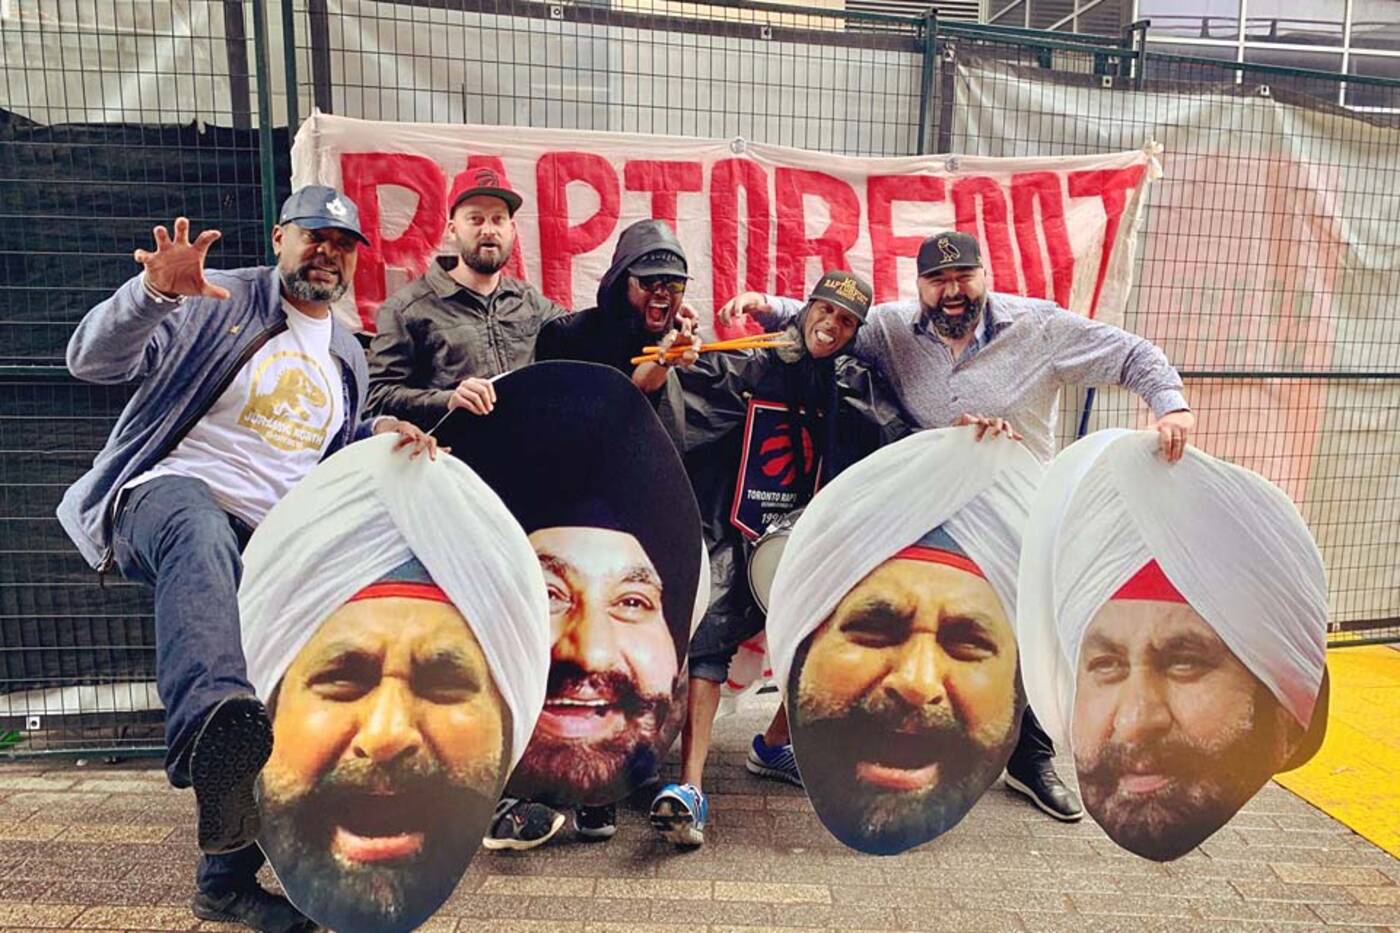 Someone just created giant Nav Bhatia Superfan heads to cheer on the